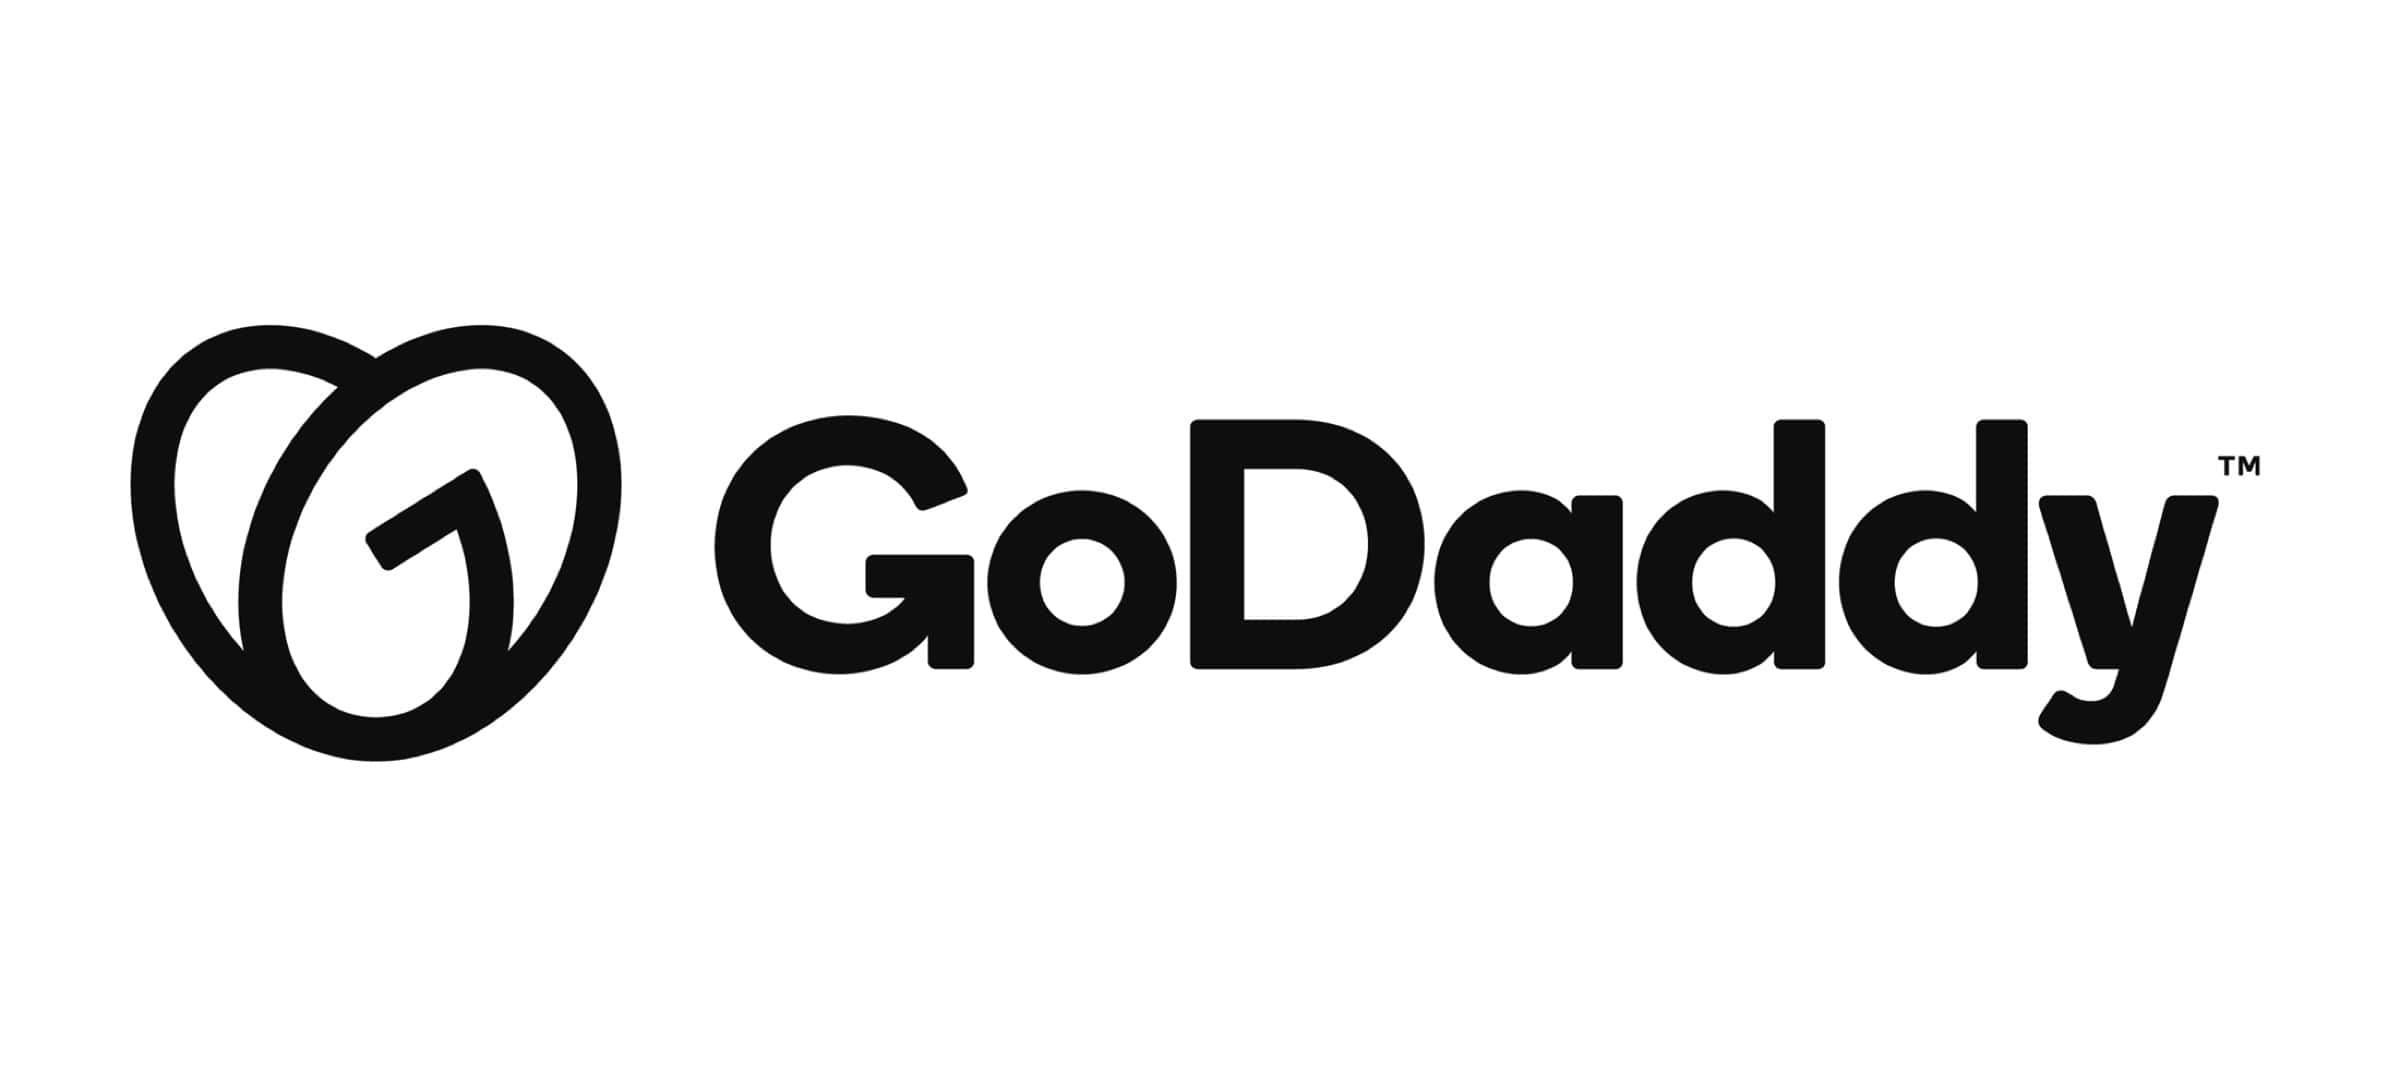 The GoDaddy website builder is a simple to use website builder with a long free trial period according to Nexym.